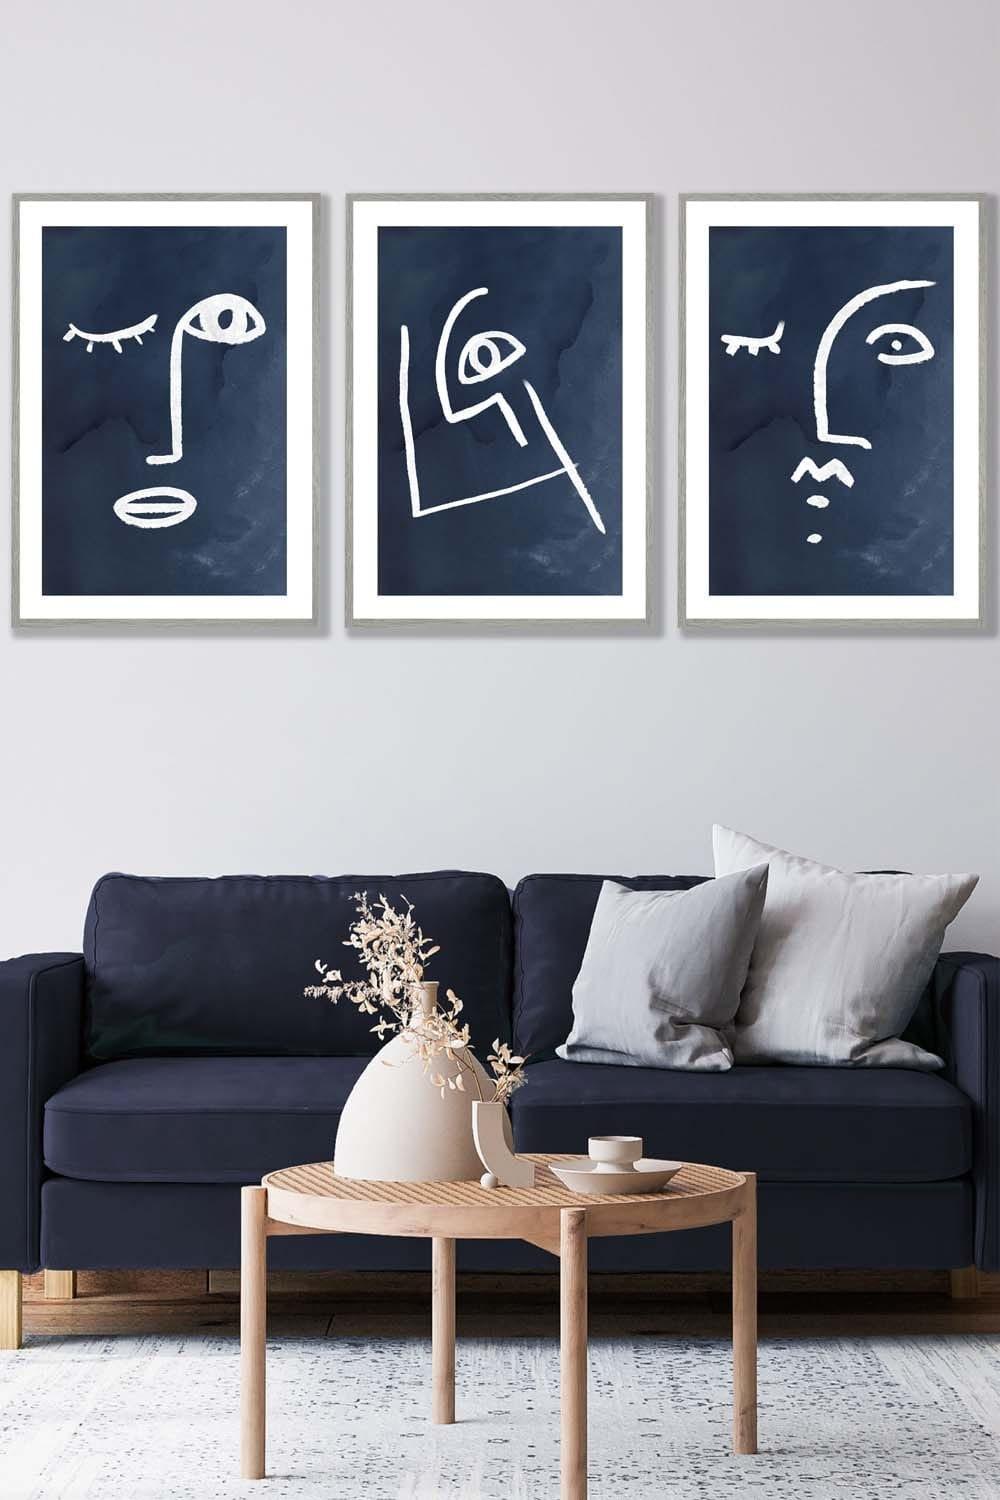 Set of 3 Light Grey Framed Navy and White Abstract Line Art Faces Wall Art